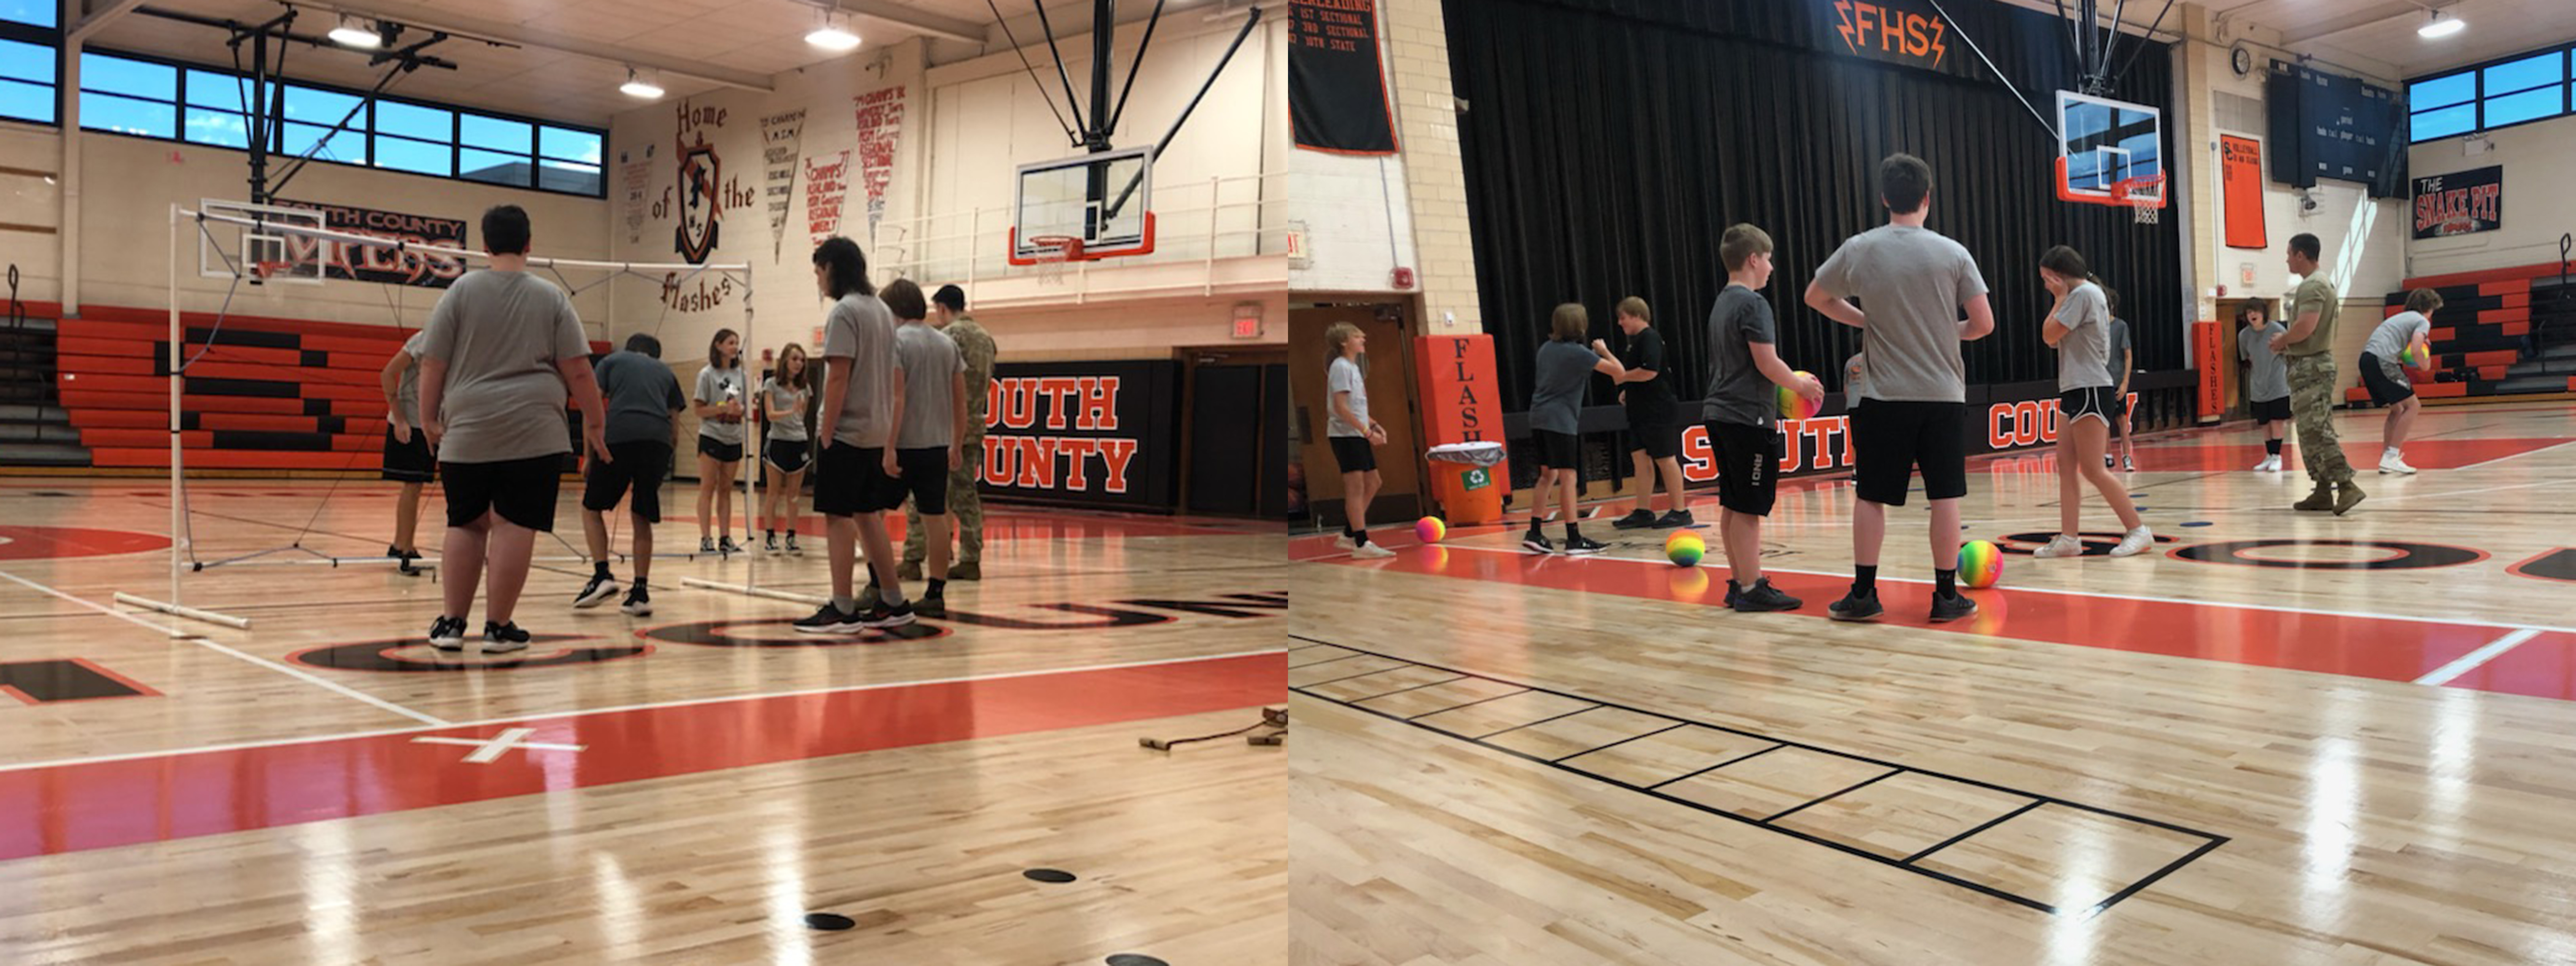 Physical conditioning class with Army recruiters. Working on team building!